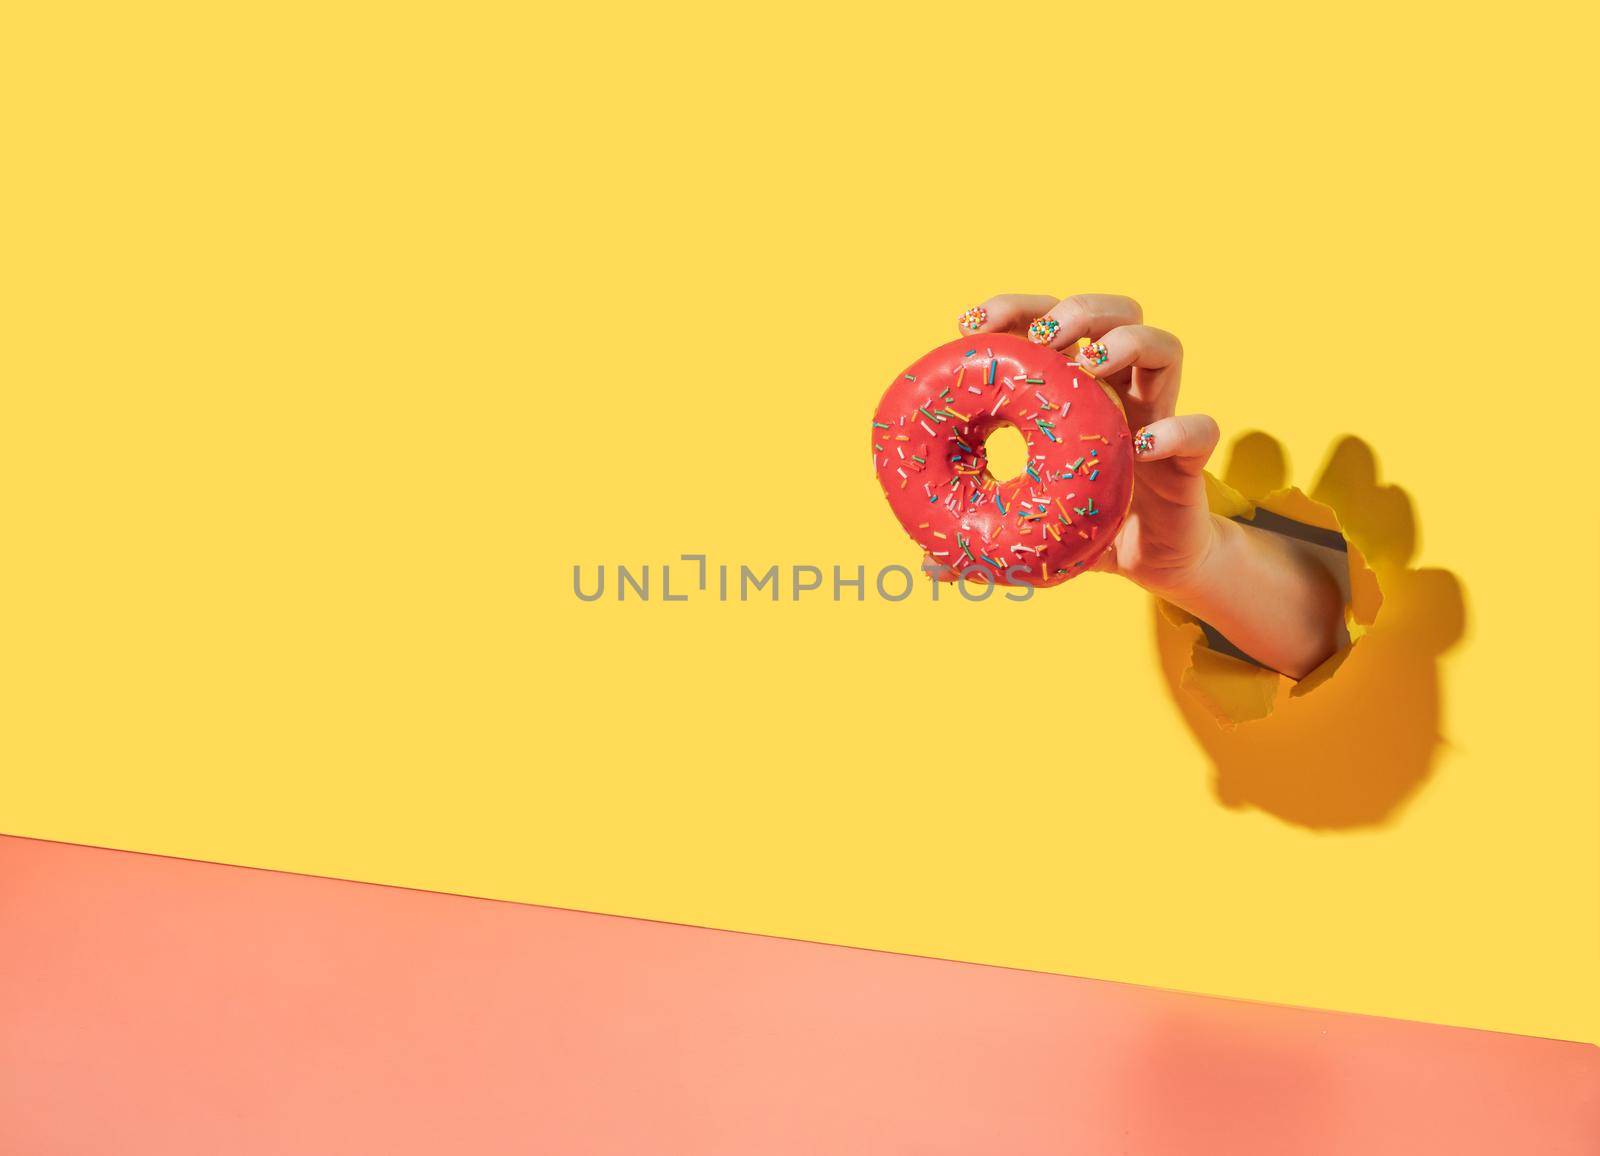 Donut in hand through torn bright yellow paper background. Donut delivery, diet, sugar concept. Female hand with sprinkle manicure holds glazed doughnut with sprinkle. Copy space. Creative still life